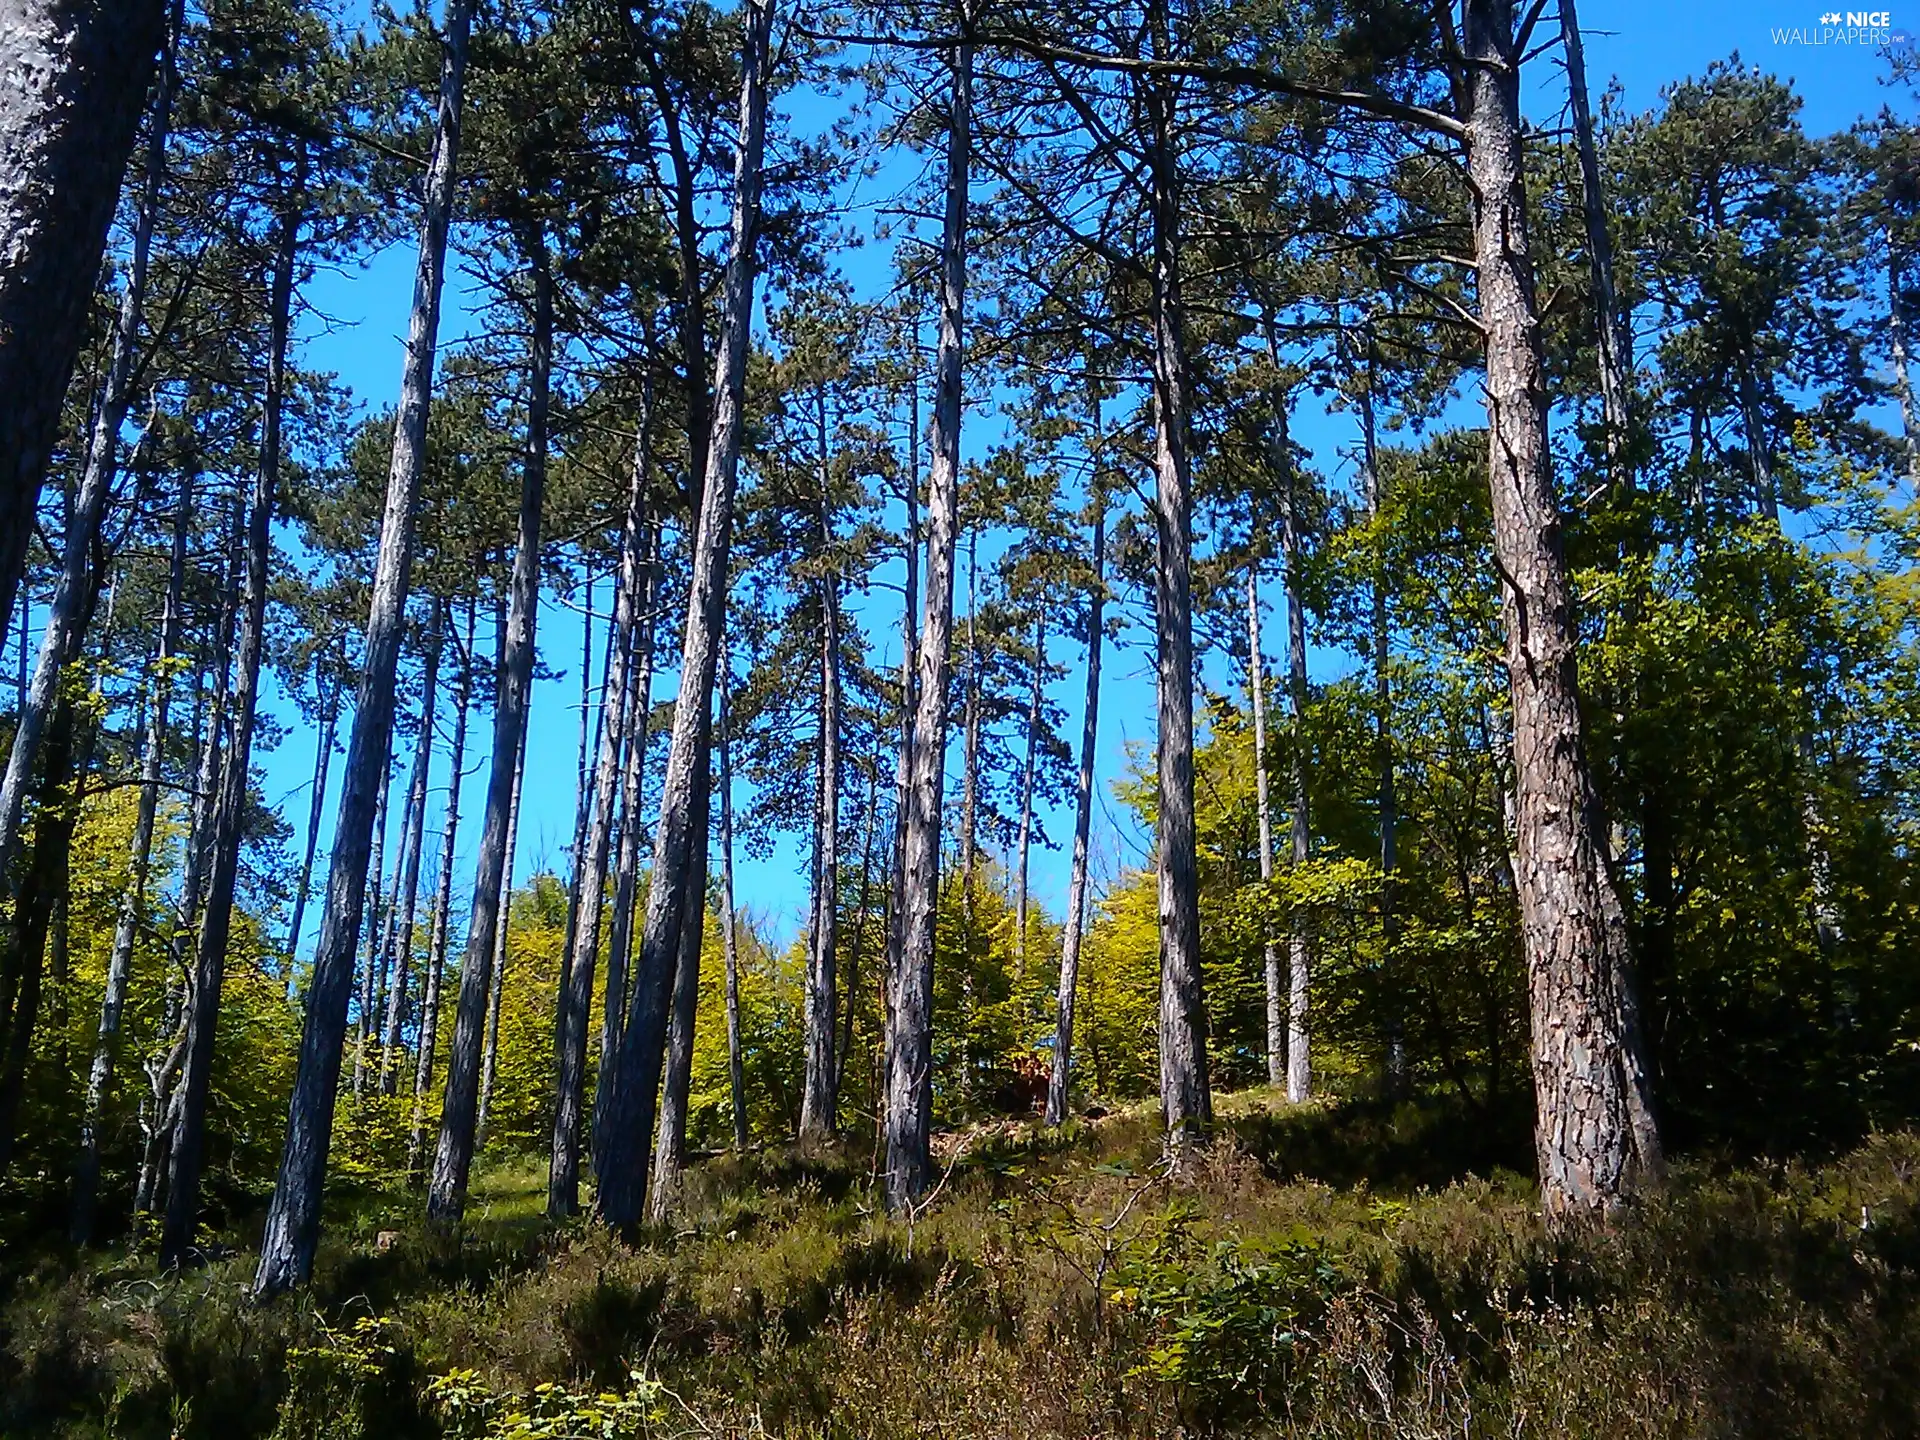 Sky, forest, Blue